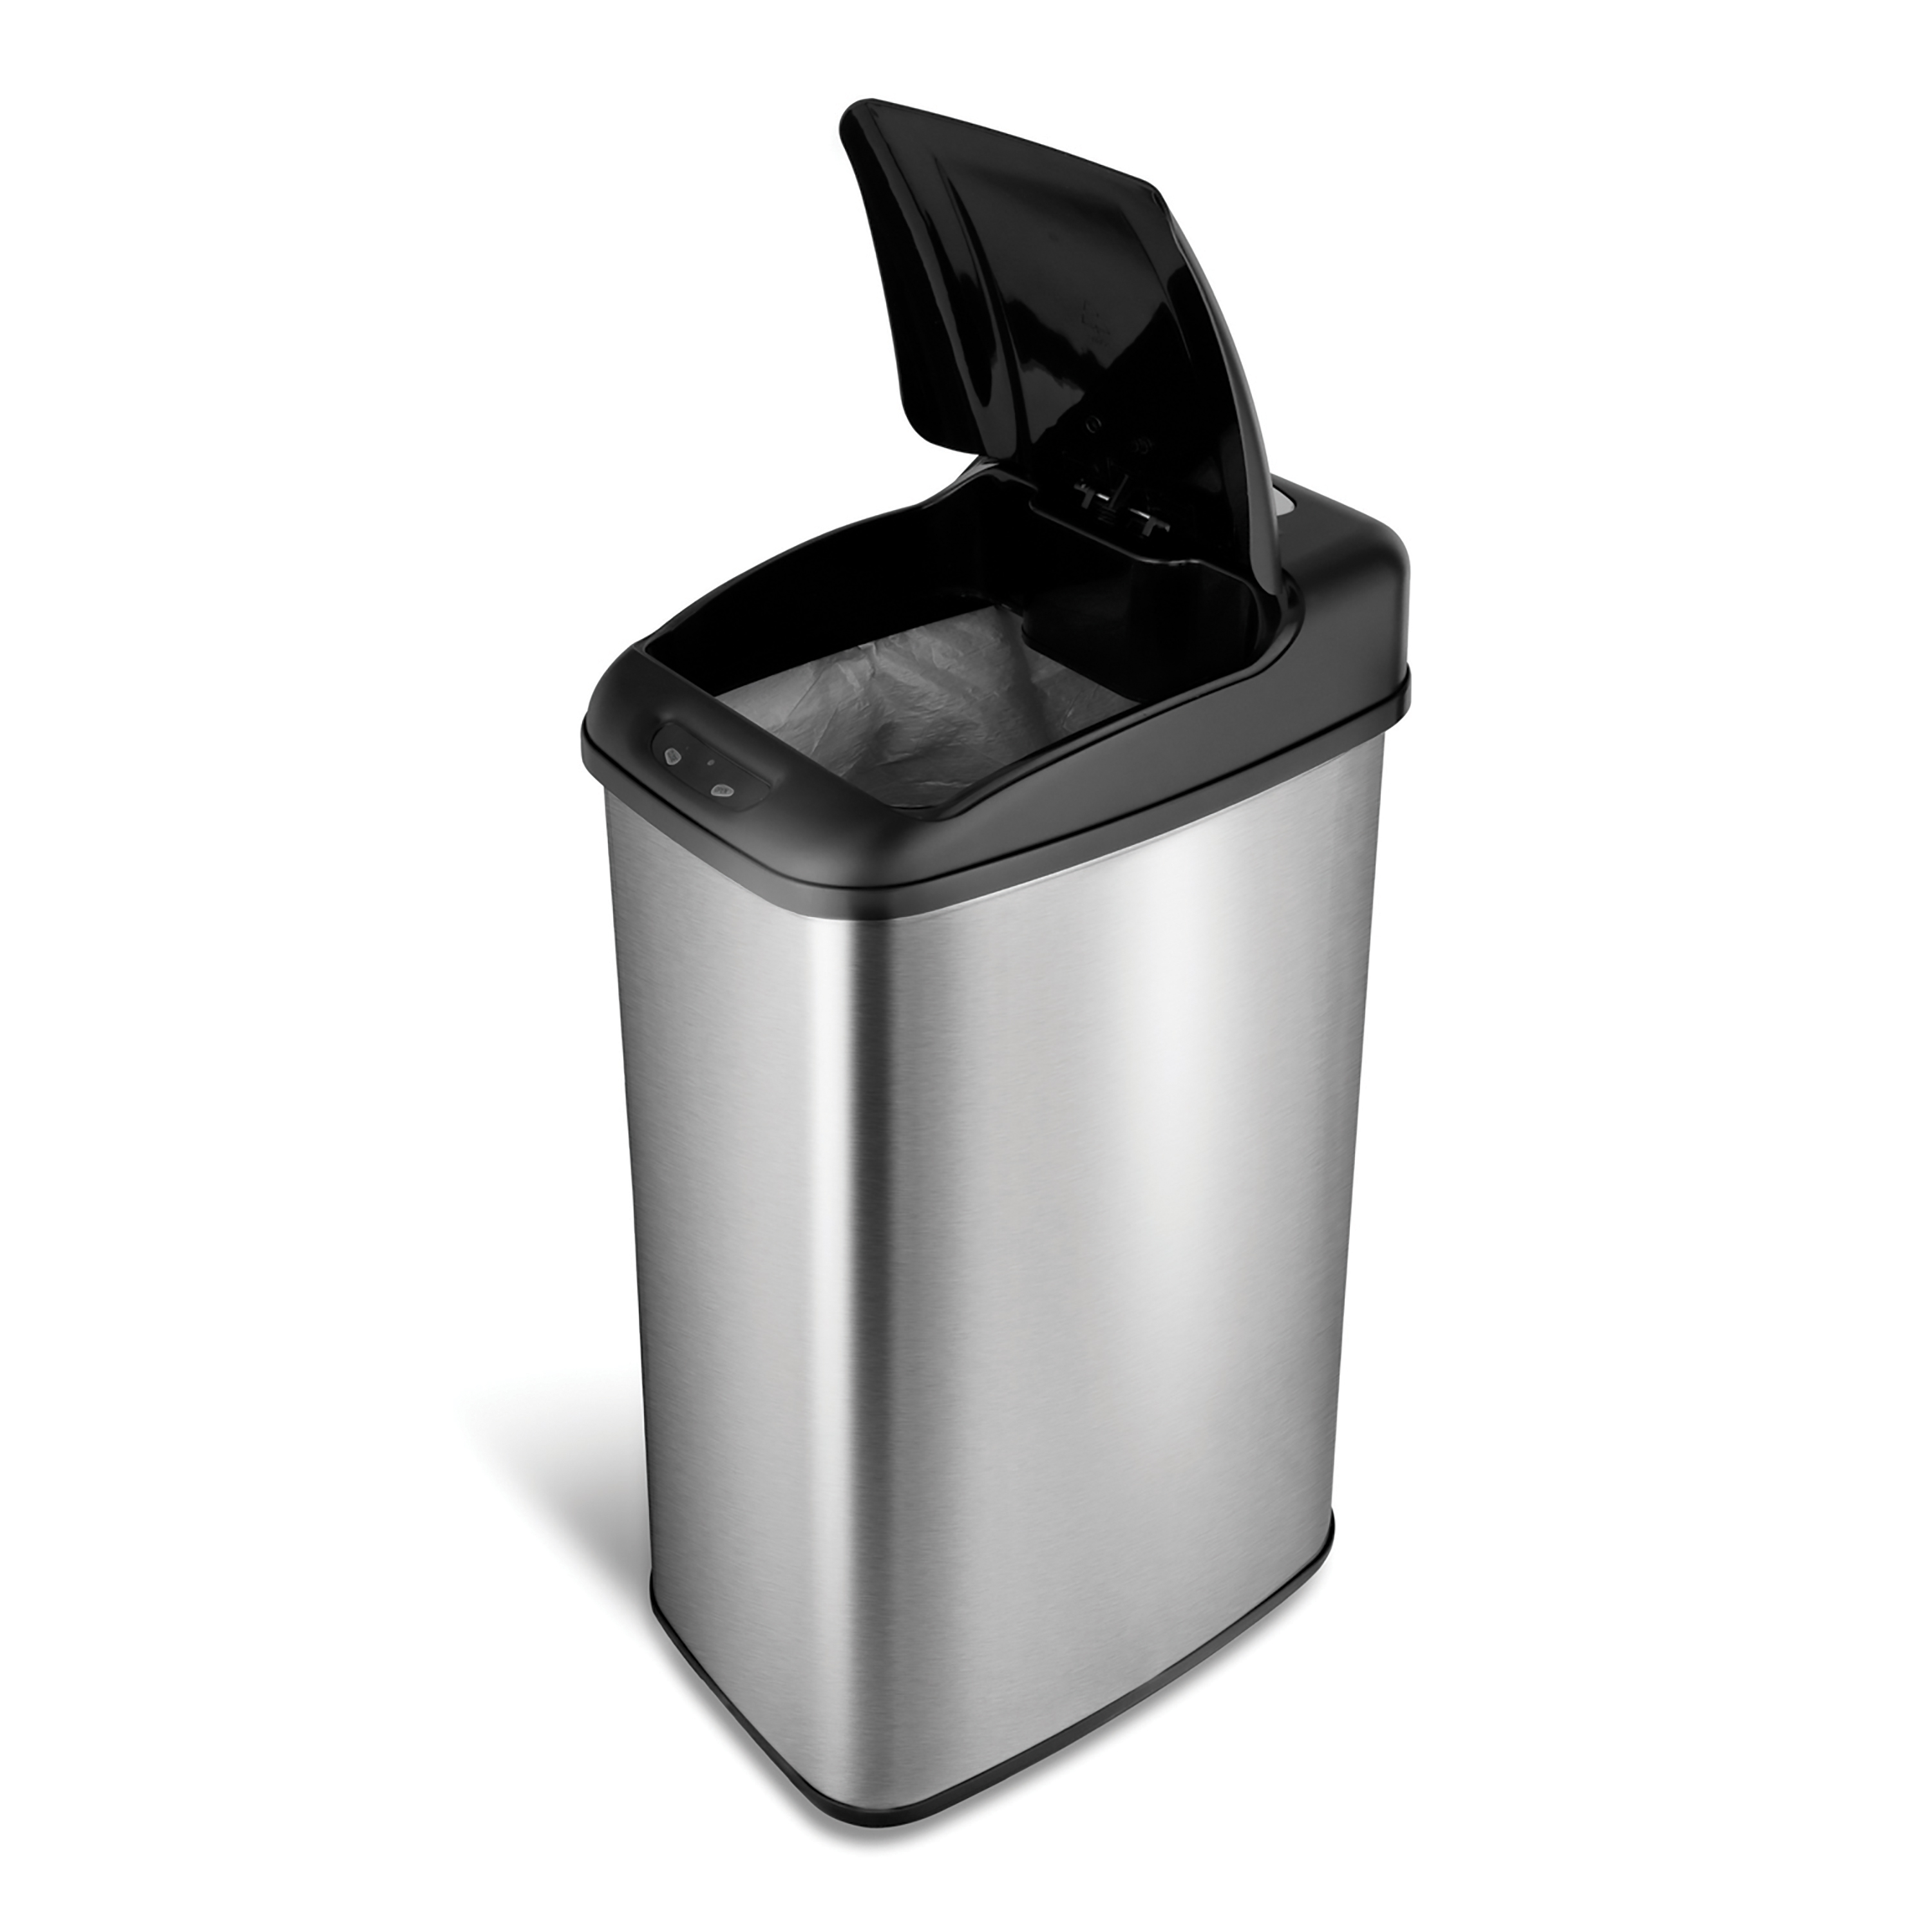 NineStars DZT-50-6 Touchless Stainless Steel 13.2 Gallon Trash Can - image 4 of 11